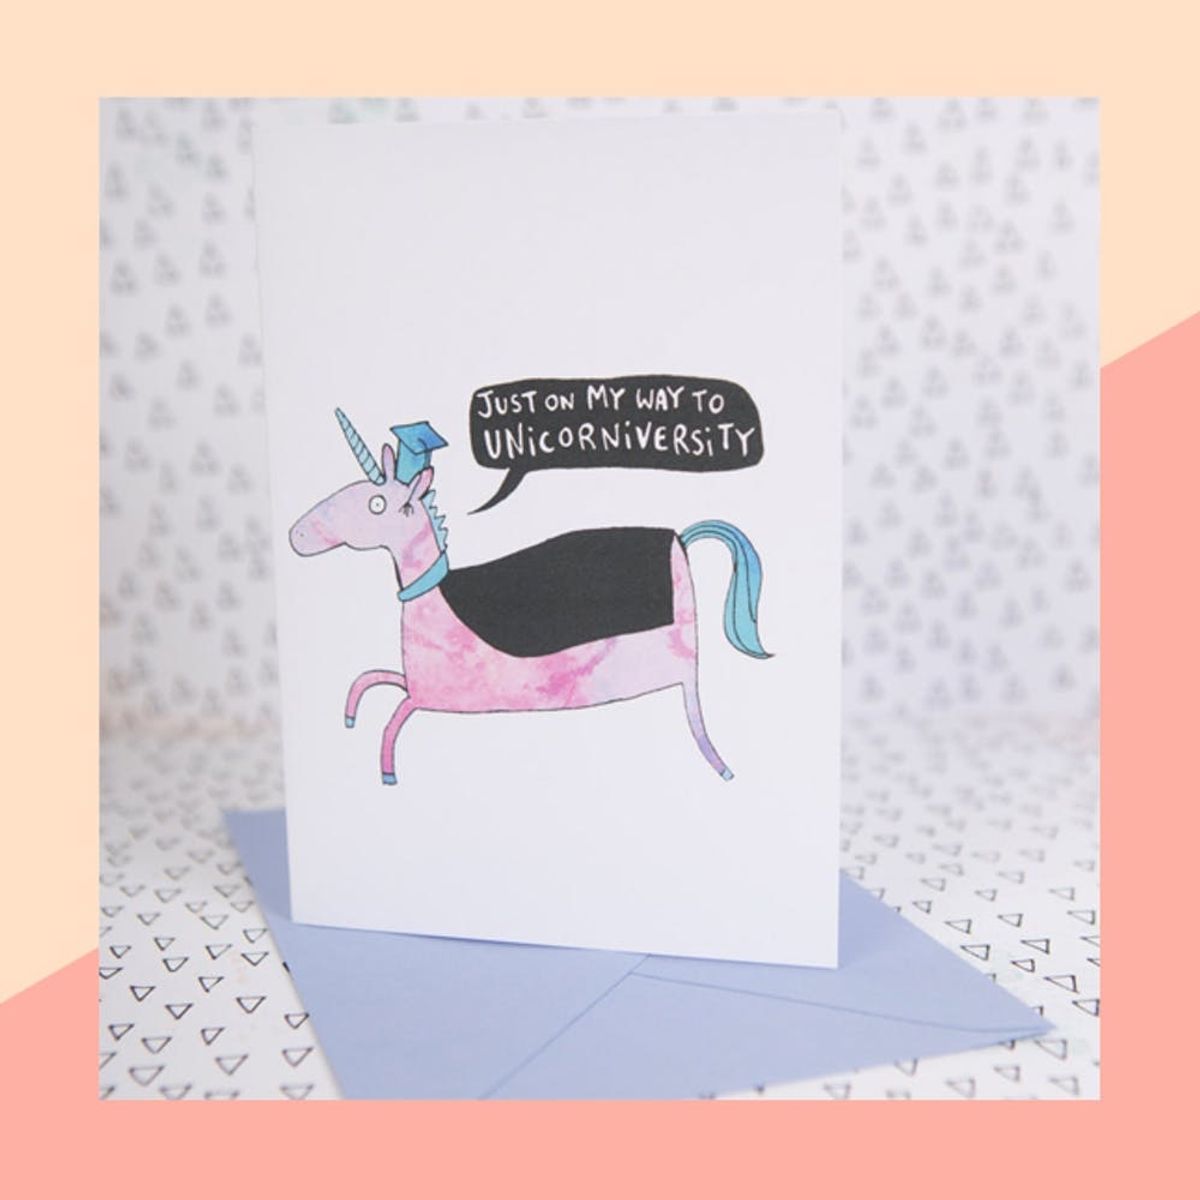 14 Sweet Graduation Cards to Send to Your Fave Grad